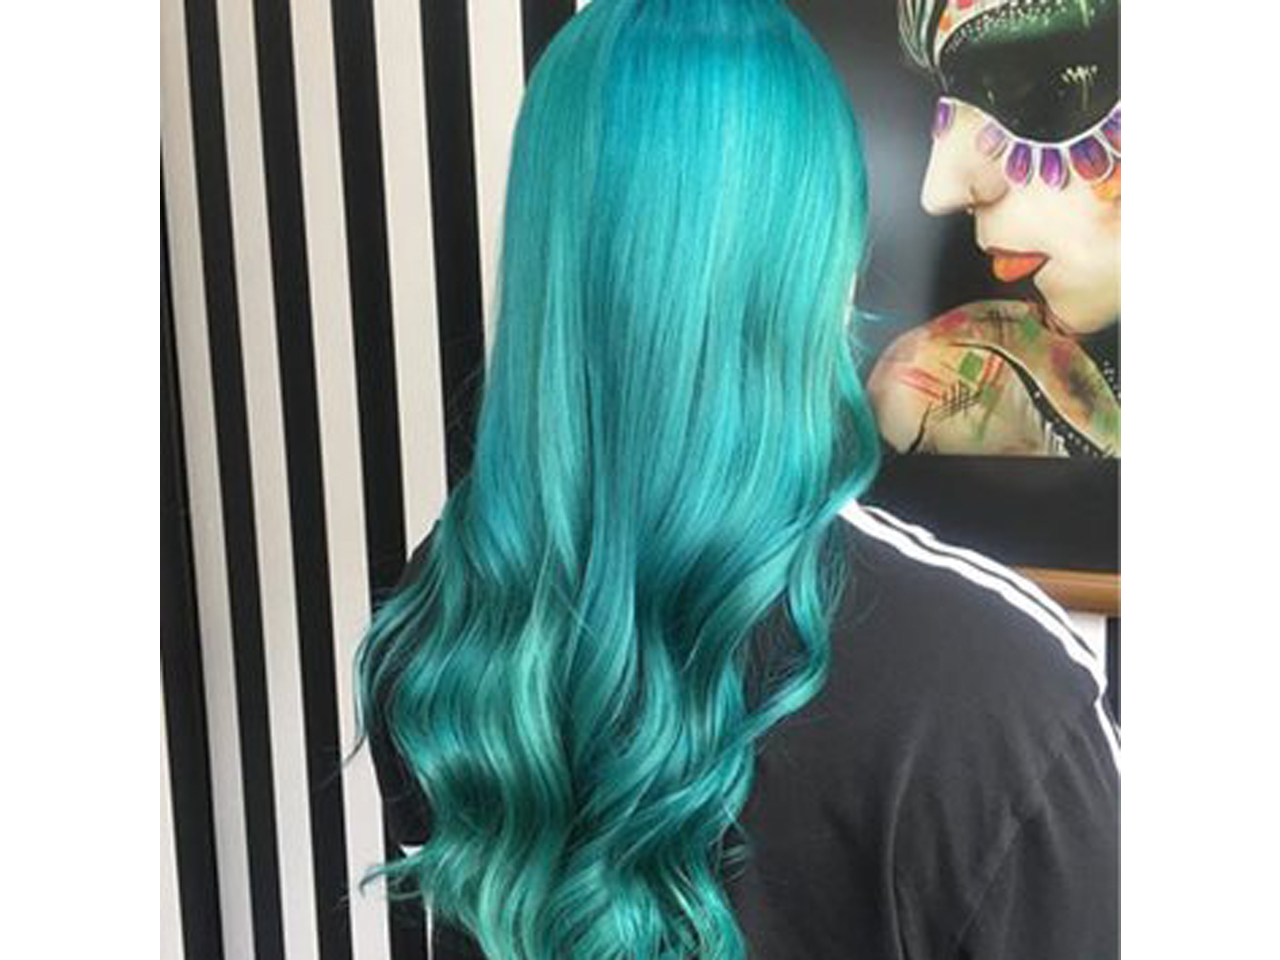 1. Blue Jade Hair Color: 10+ Ideas and Inspiration for Your Next Look - wide 7